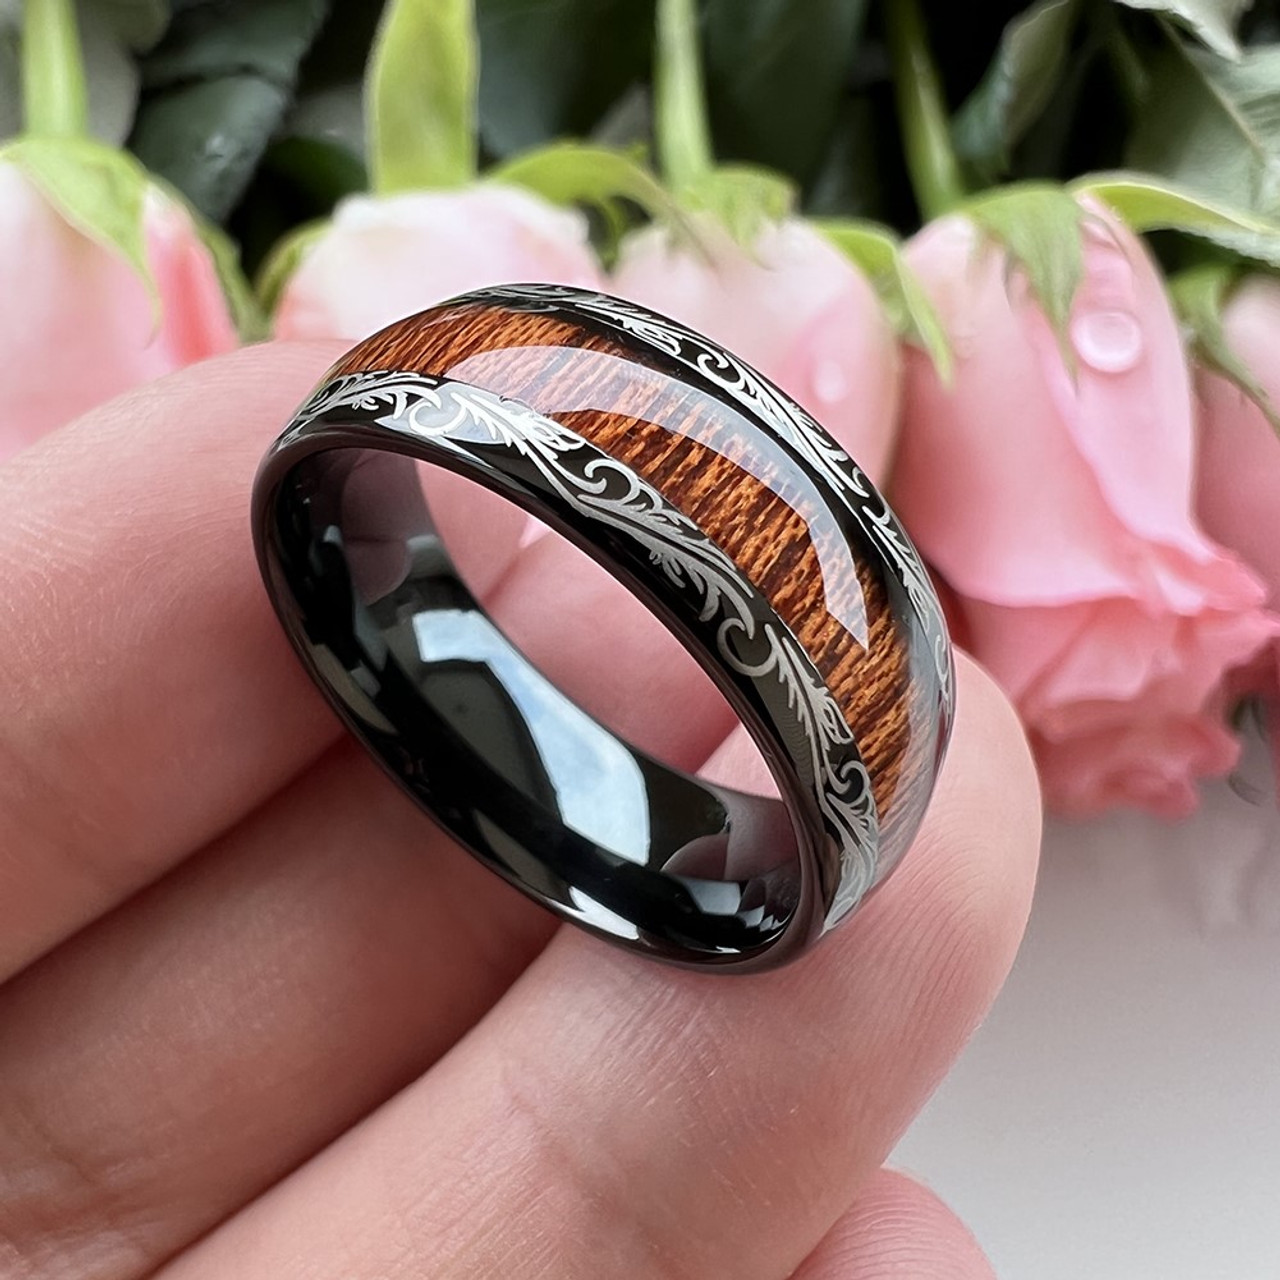 DAD Ring for Men : Gift for Papa from Daughter/Son, Handsome 2-Tone  Stainless Steel I Love You Engraved Inside Dad Ring Band for Daddy with  Gift Box & Gift Card,6mm Width,size 7|Amazon.com